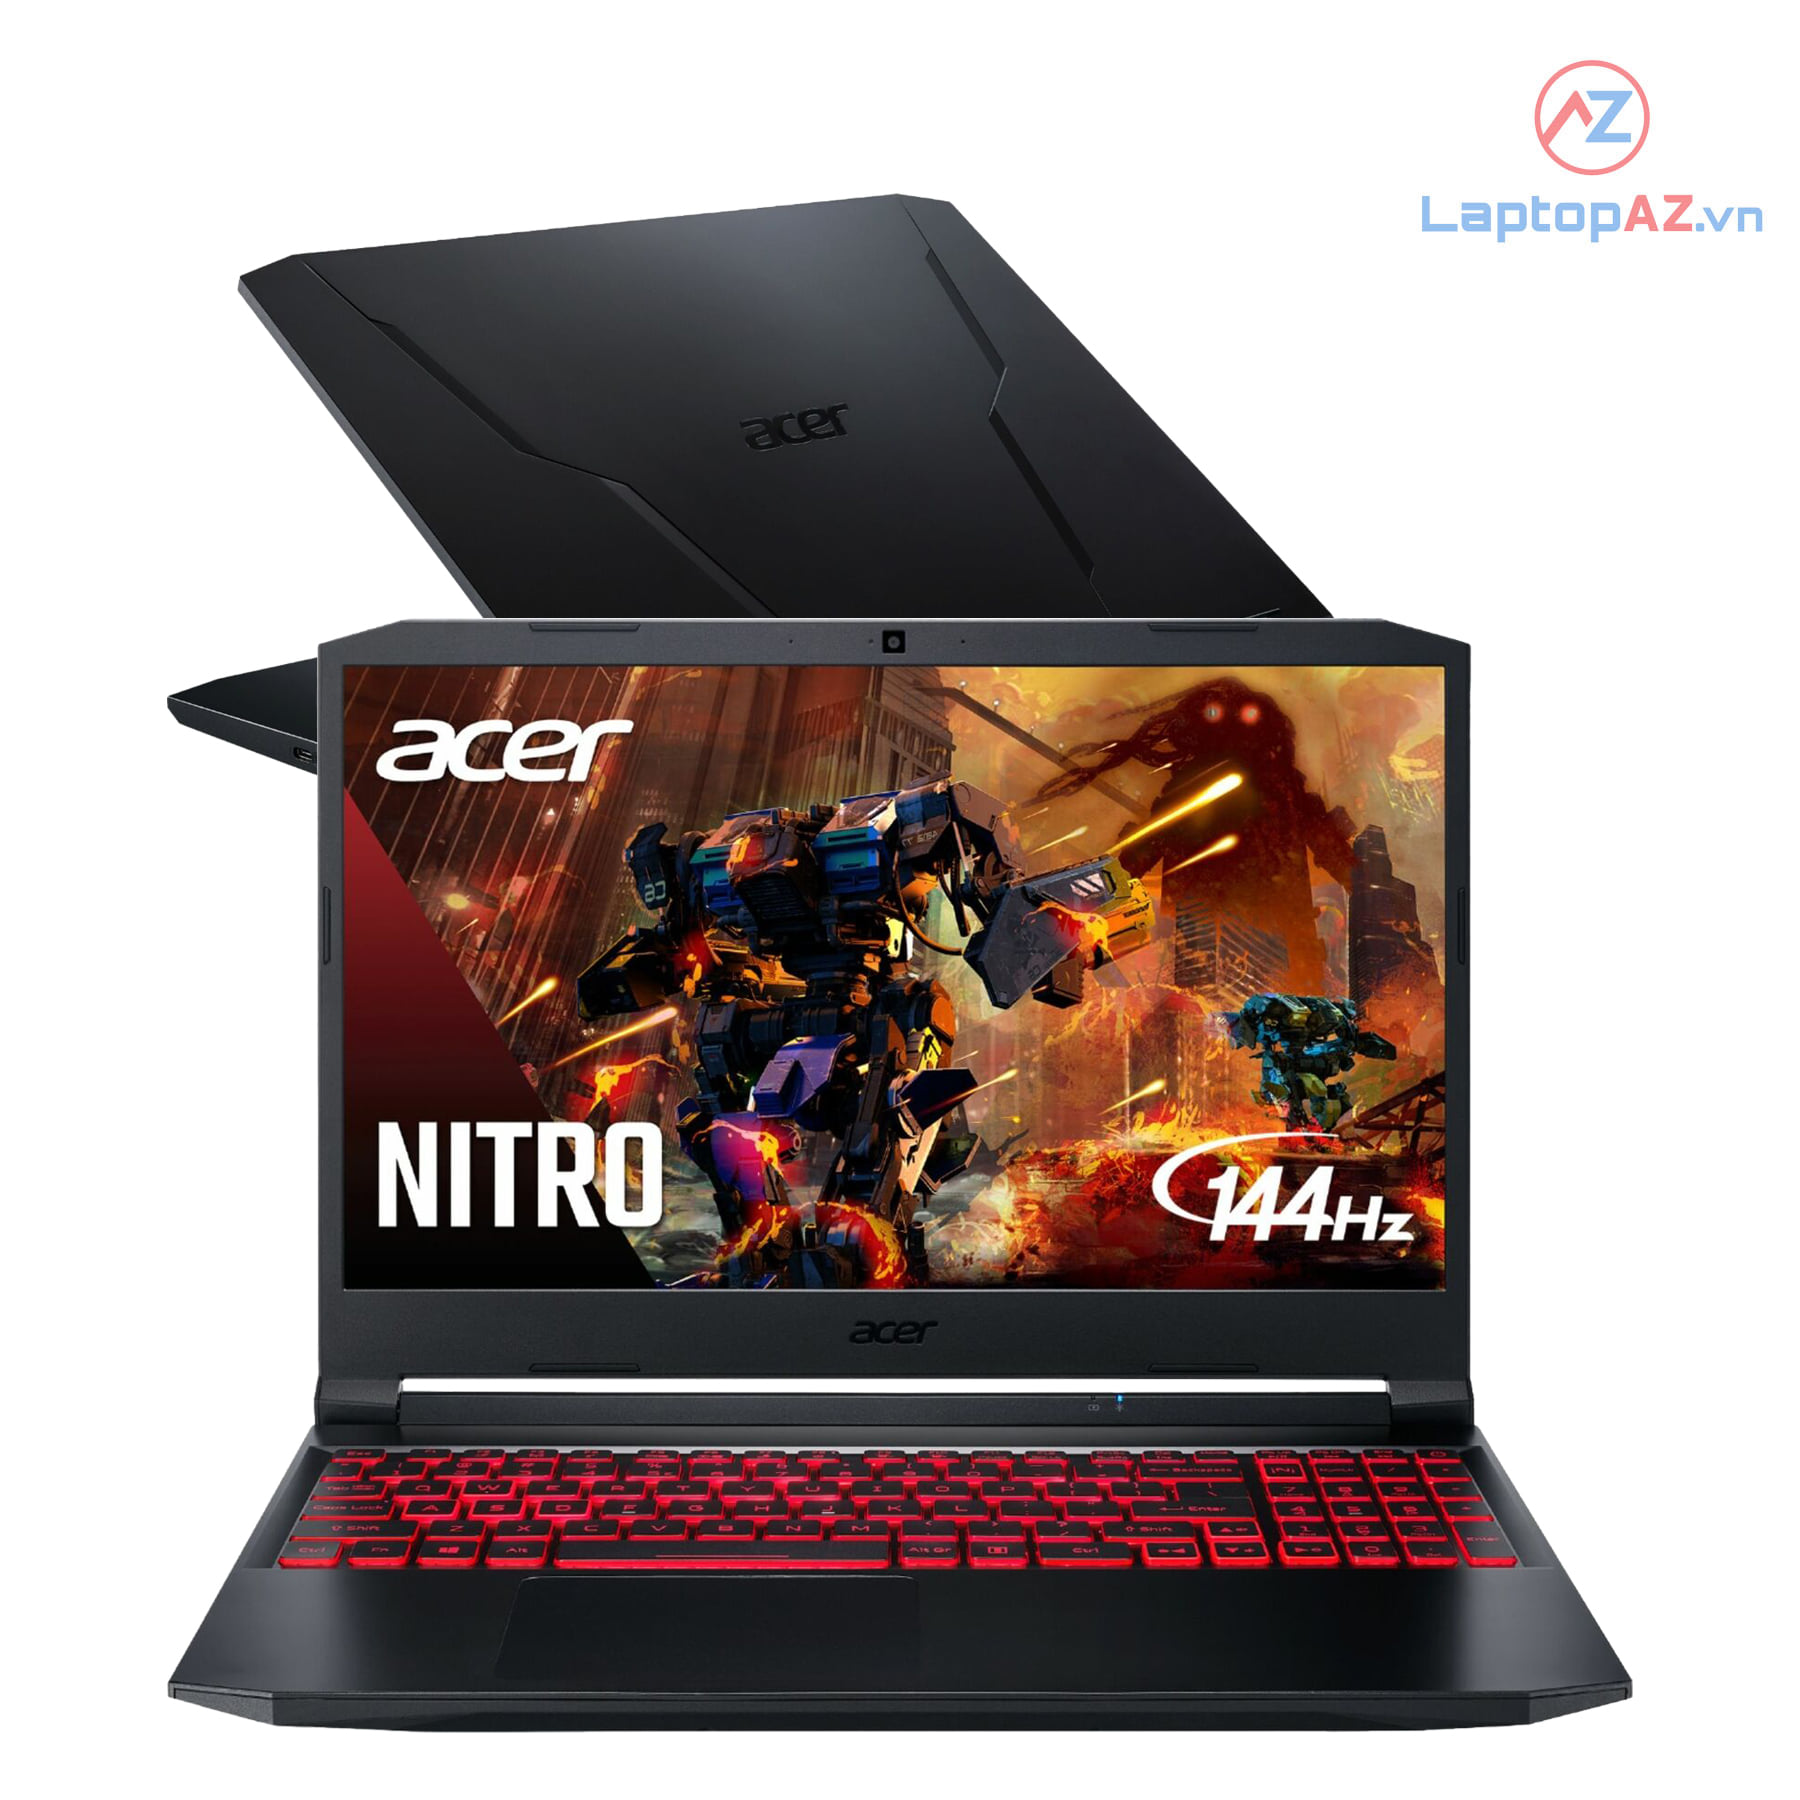 [REF] Laptop Gaming Acer Nitro 5 2021 AN515-57-5700 (Core i5 - 11400H, 8GB, 512GB, RTX3050, 15.6'' FHD IPS 144Hz)